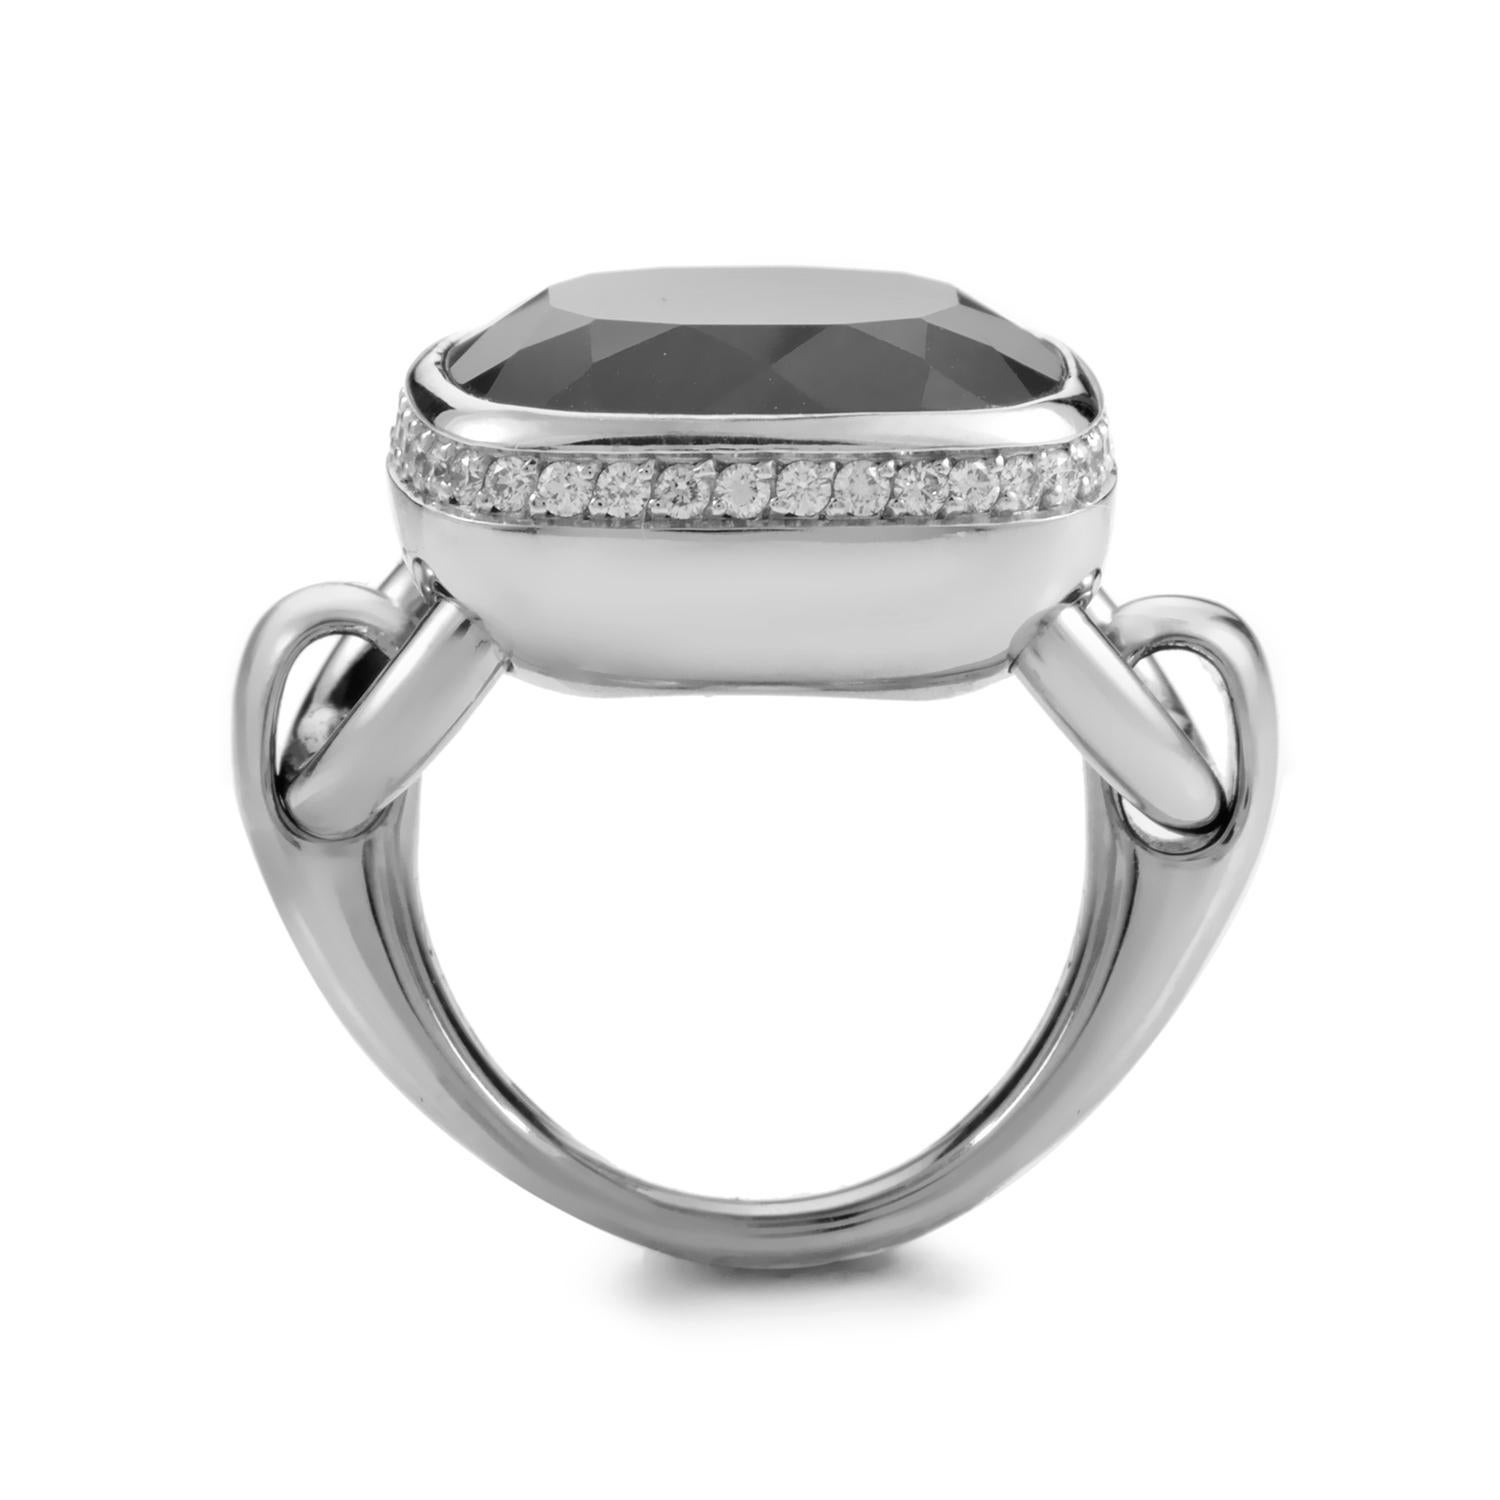 This eclectic Poiray ring is enigmatic and distinctive. The ring is made of 18K white gold that is specially designed with hinges for a smooth, movable, cushion shaped bezel setting. A faceted gray agate totaling a generous ~10ct smoothly displayed